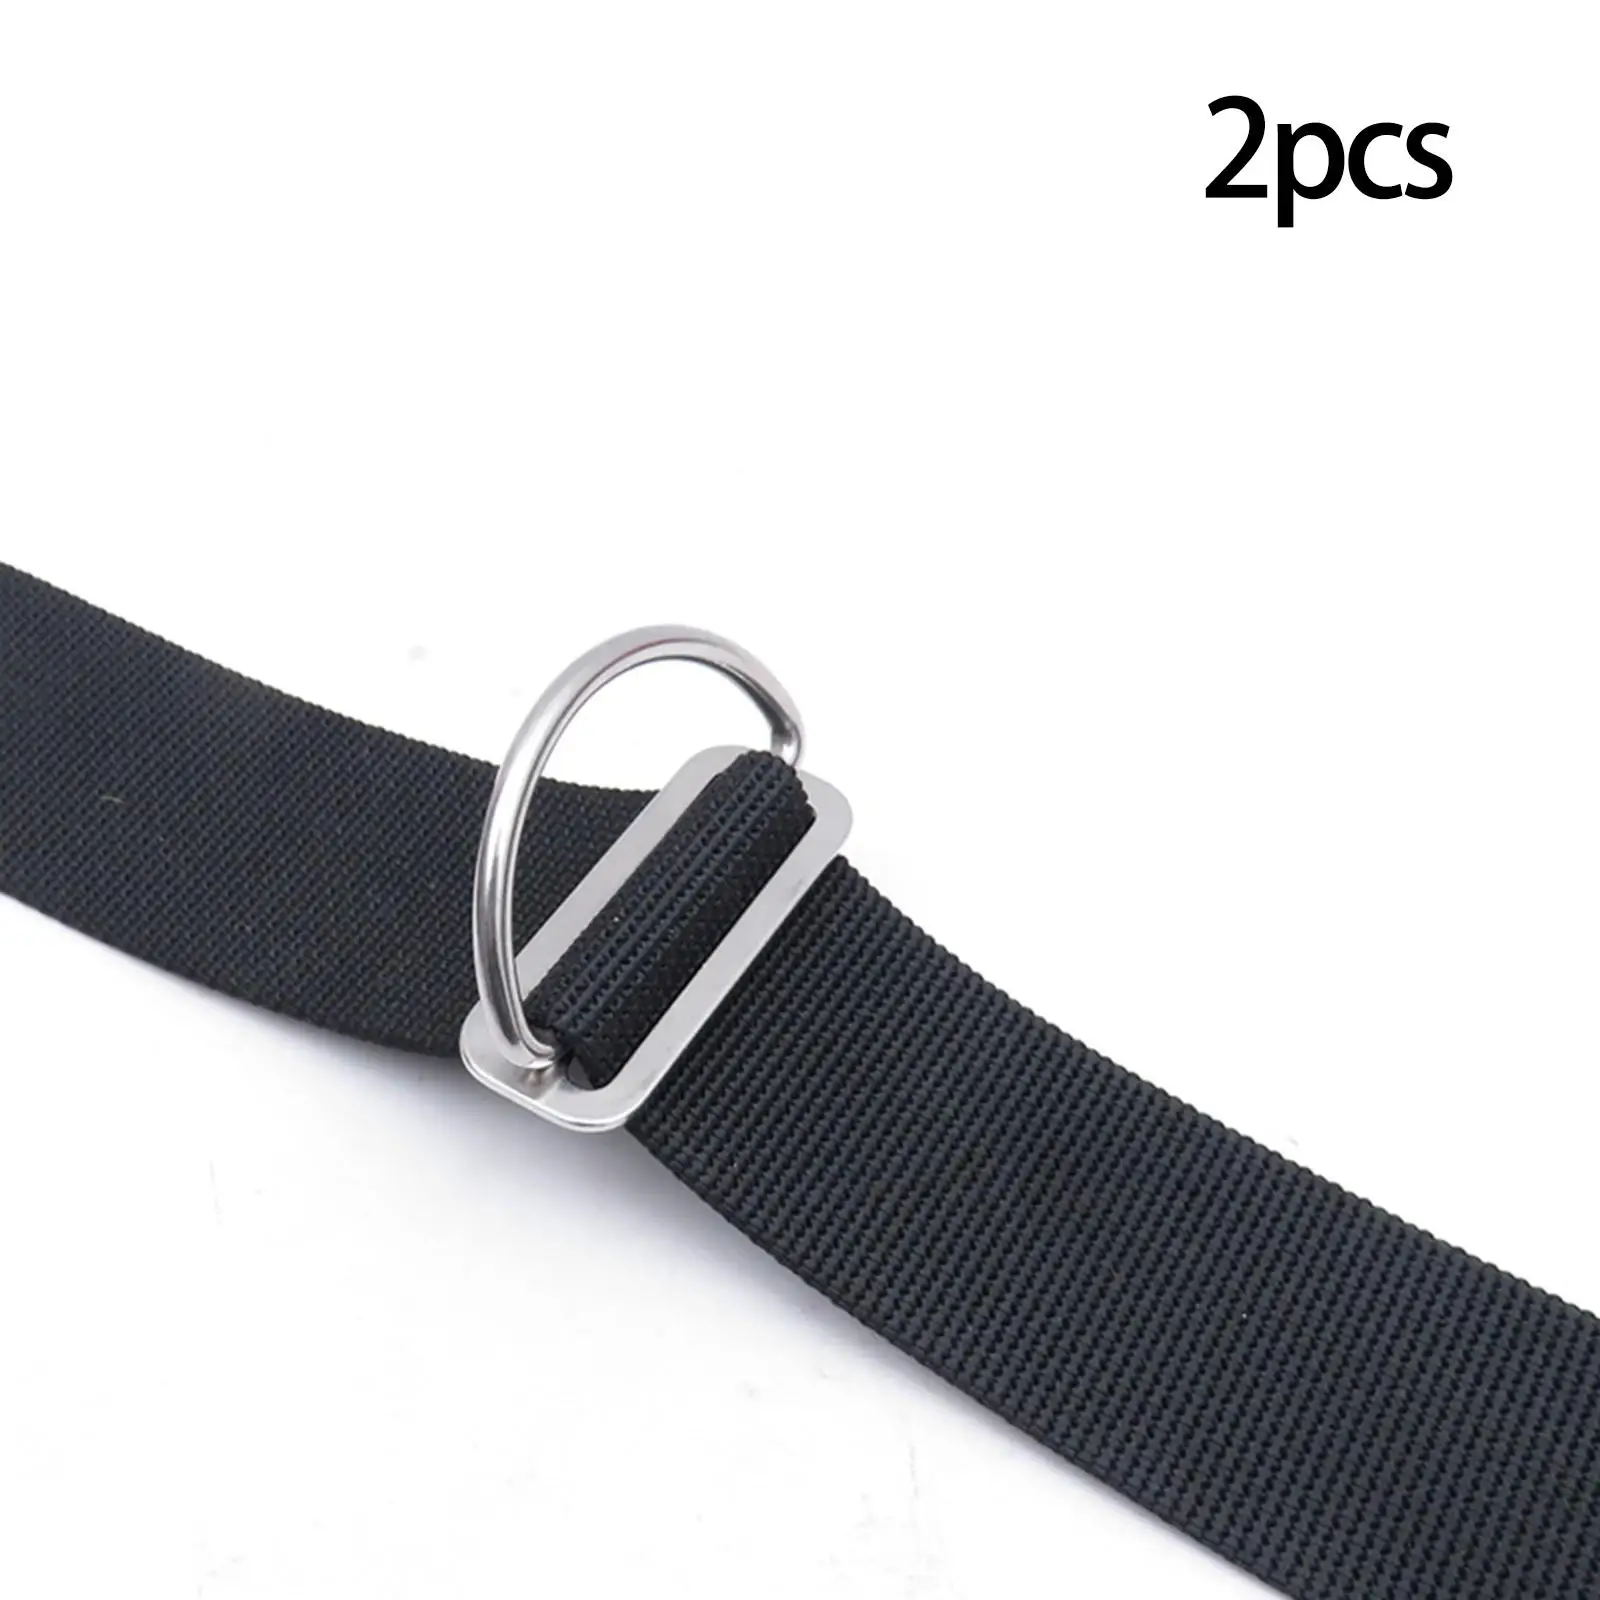 Weight Belt Keeper Stopper Scuba Diving D Rings for Snorkeling Dive Strap Width